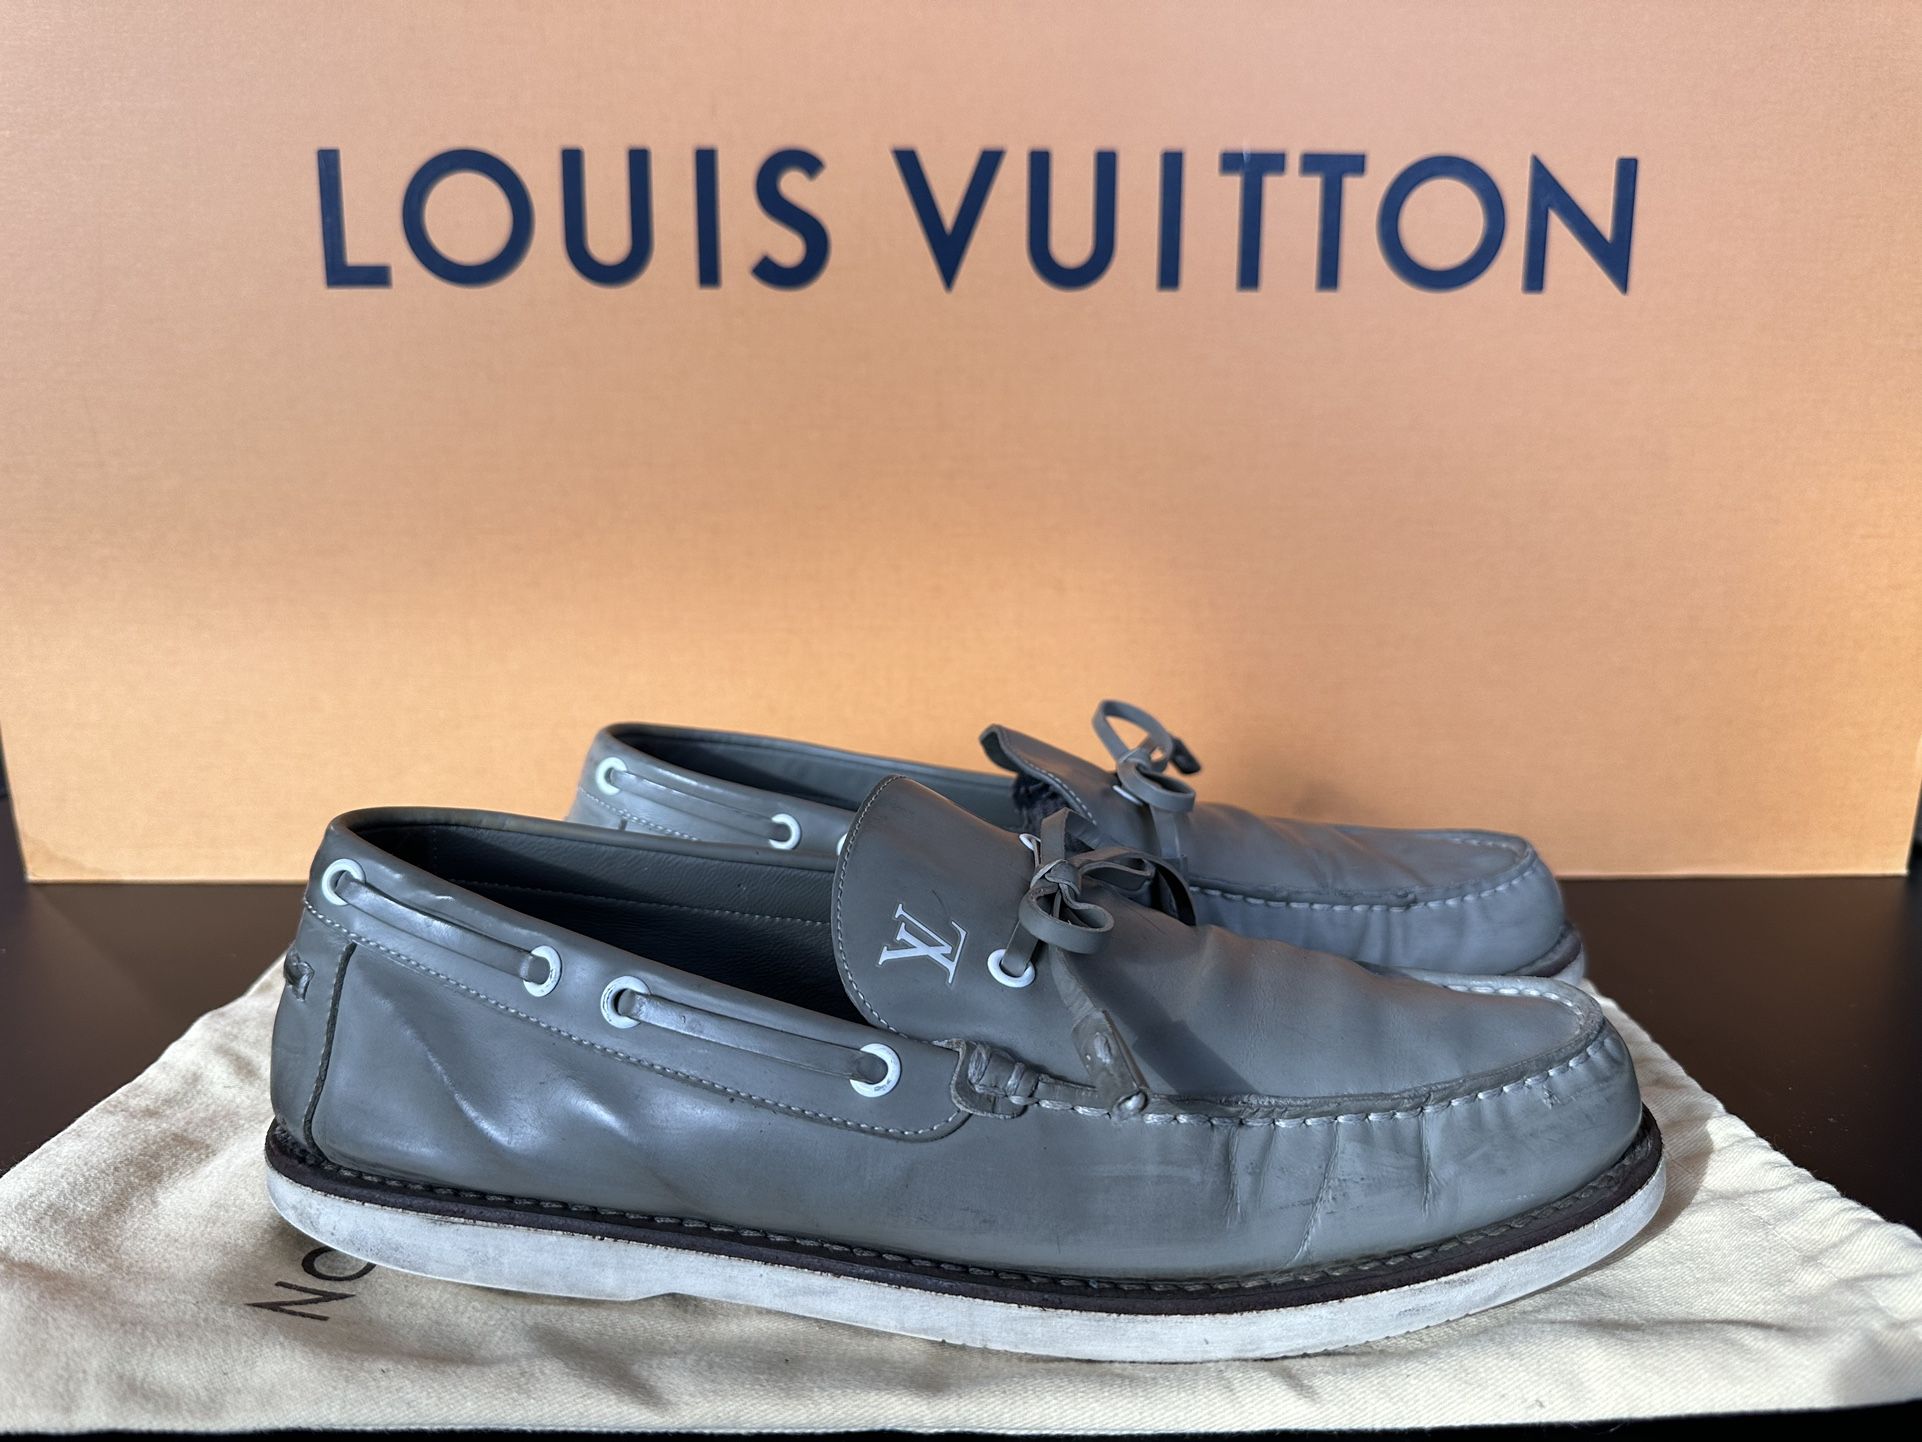 Louis Vuitton Gold Pumps Size 38 1/2 for Sale in New York, NY - OfferUp